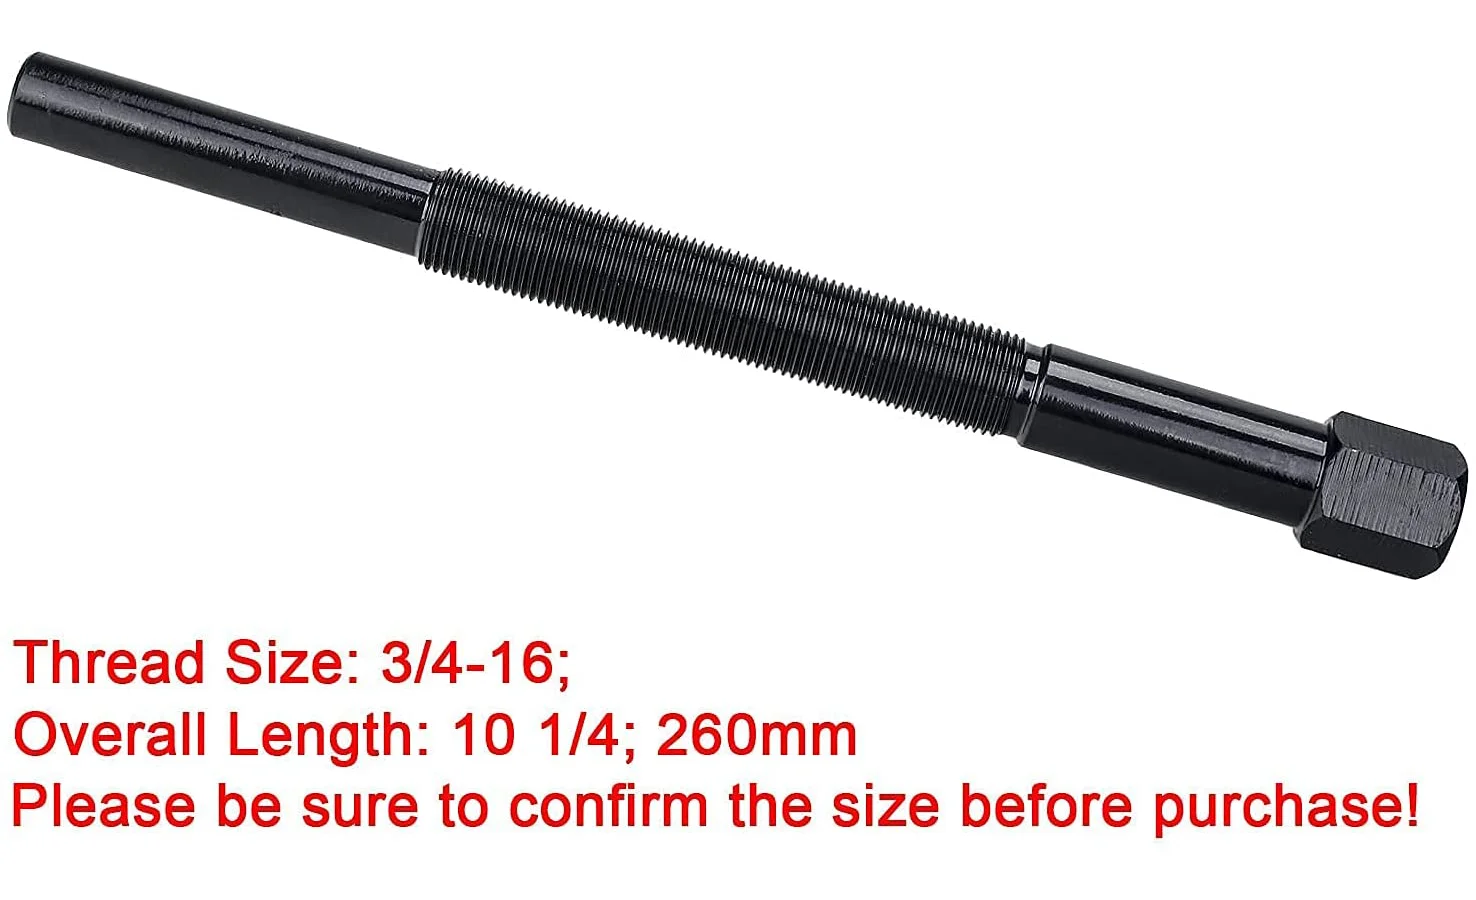 All-new UTV Main Drive Clutch pull Tool Heat treated Quality Steel Durable Clutch remover compatible with most Polaris models 19 all new utv main drive clutch pull tool heat treated quality steel durable clutch remover compatible with most polaris models 19